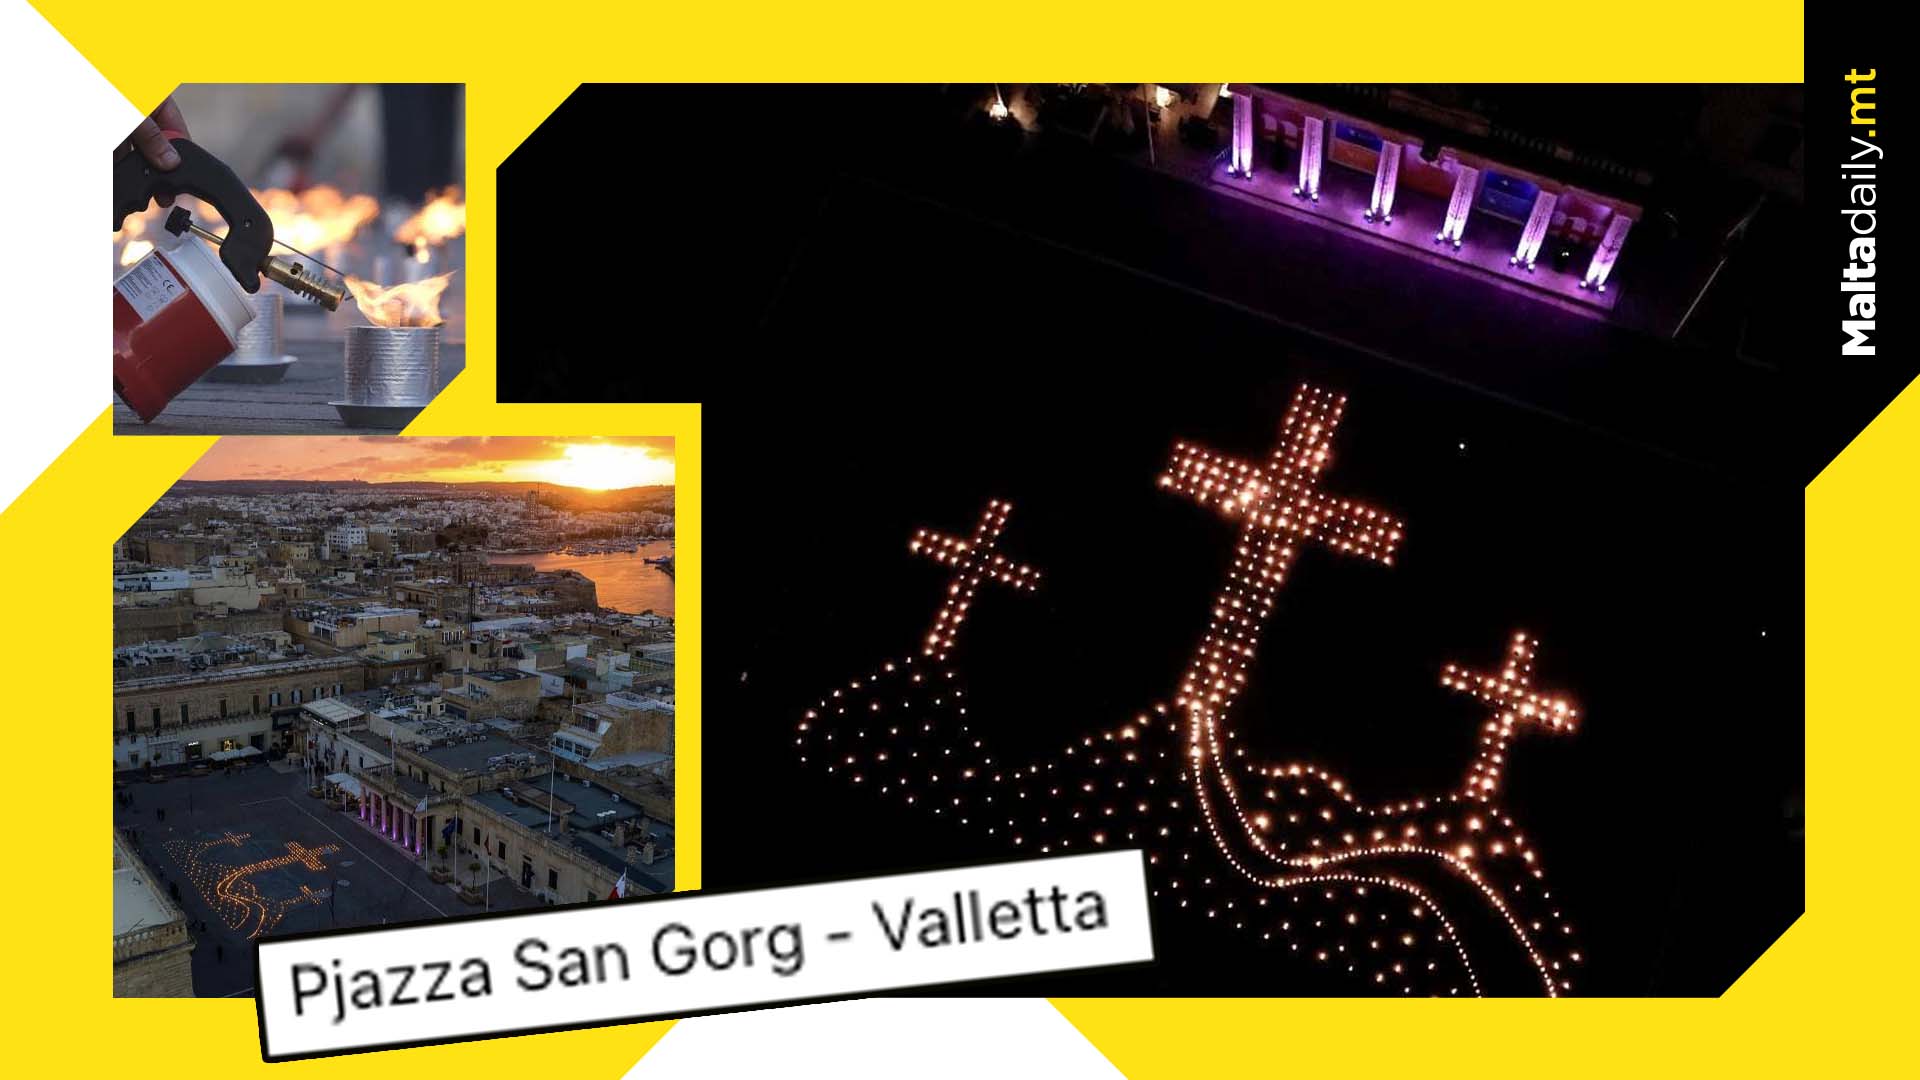 St George's Square in Valletta shines with lantern crosses